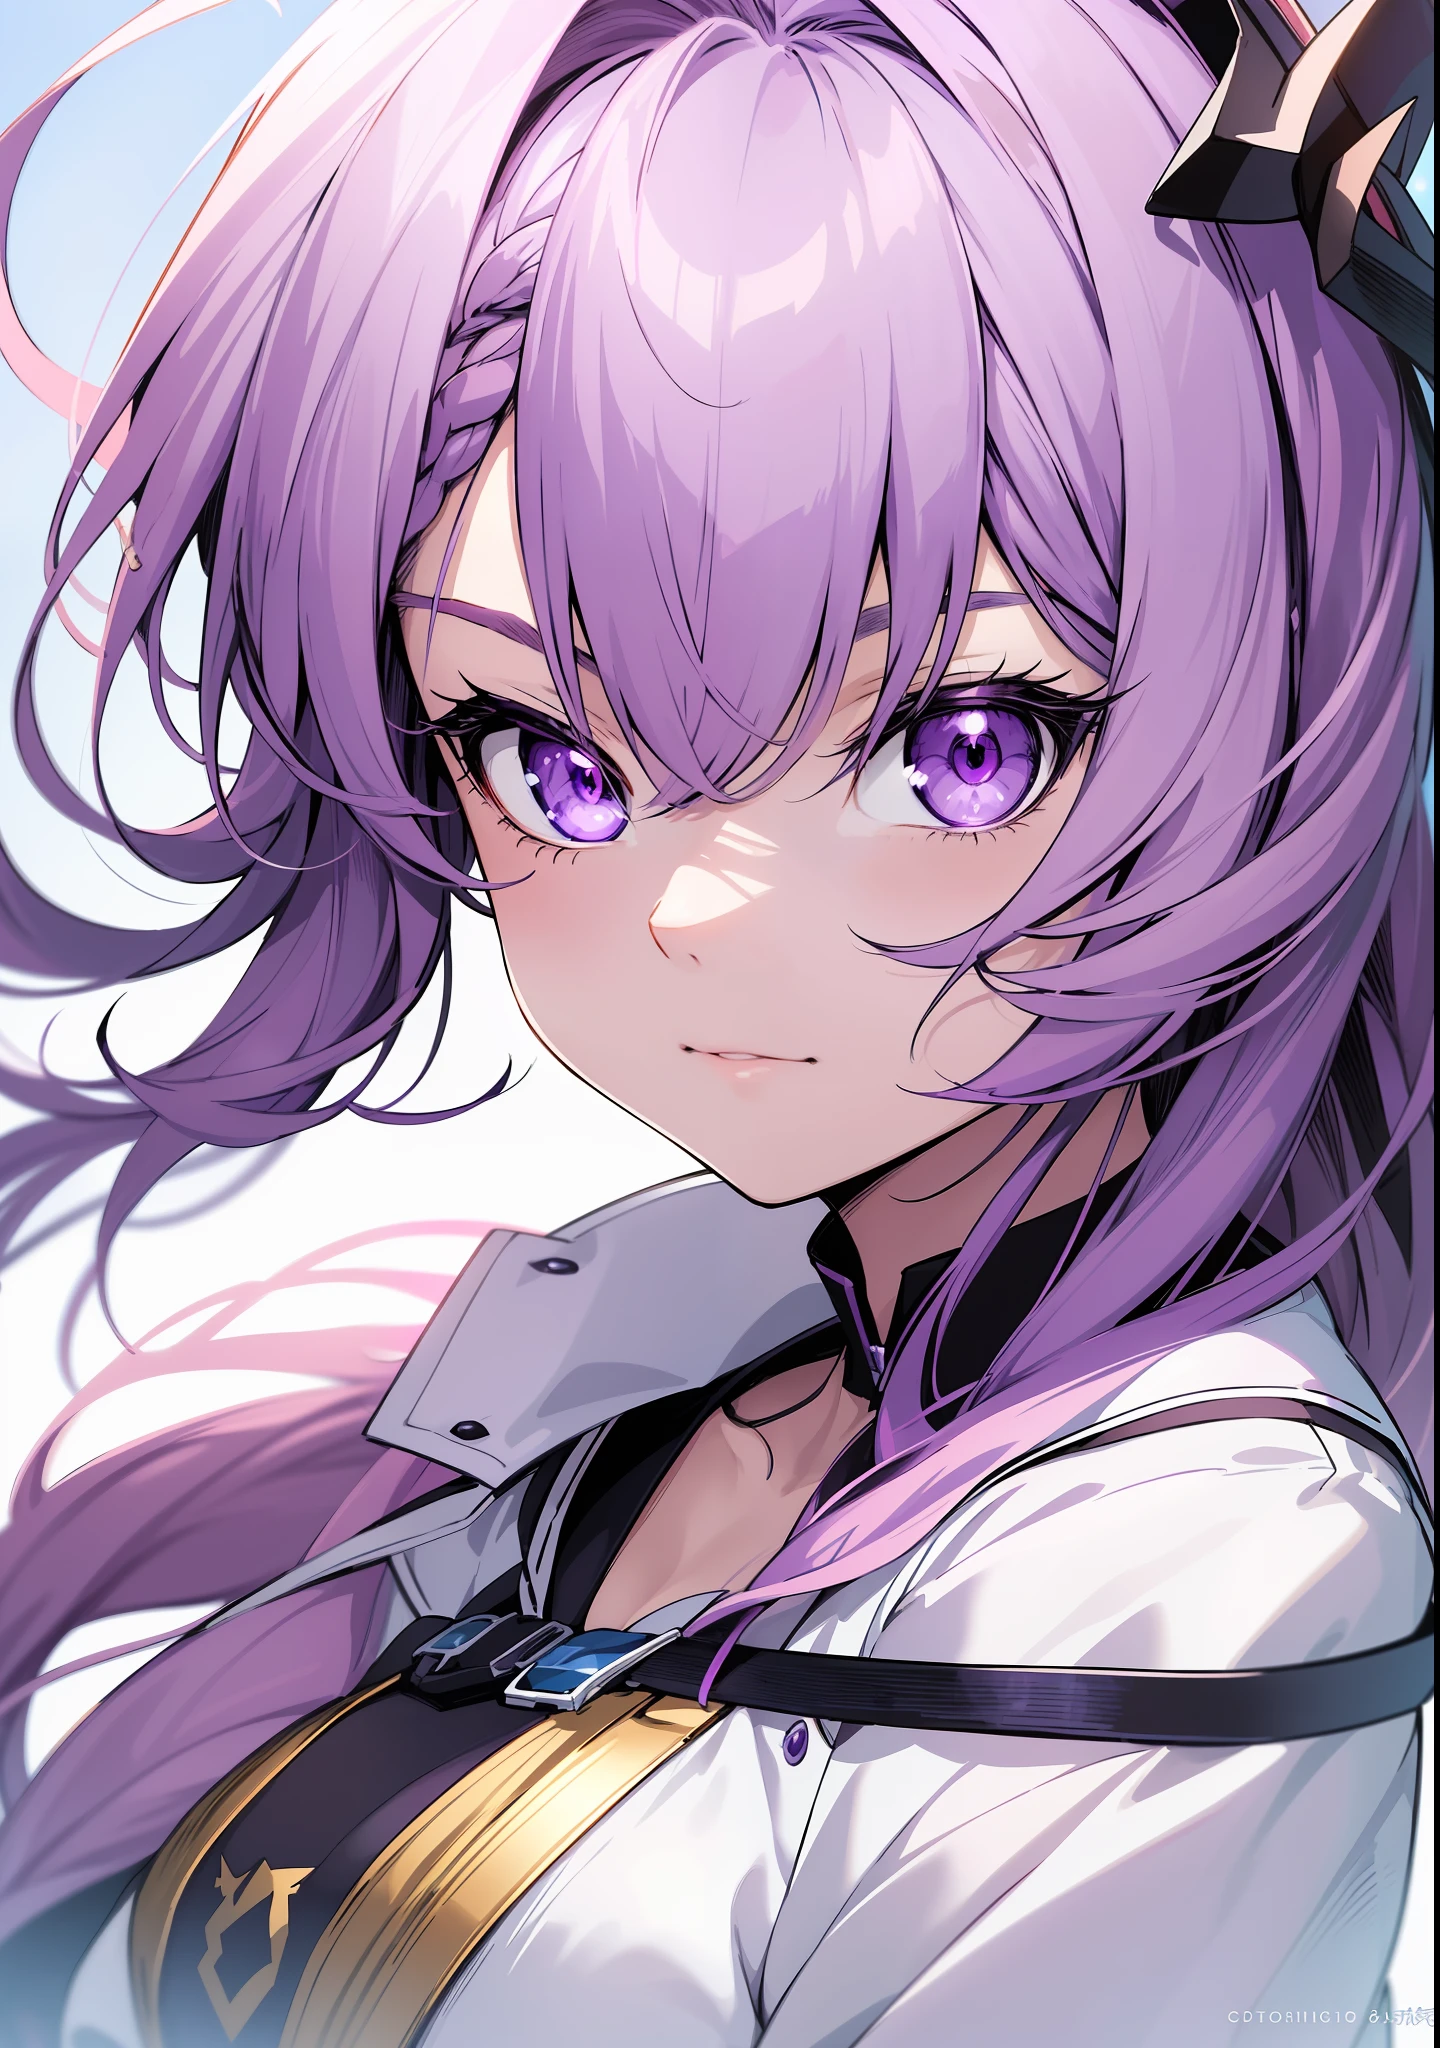 Cute Anime Girl With Purple Hair And Headphones Background, Good Discord  Profile Pictures, Discord, Chat App Background Image And Wallpaper for Free  Download